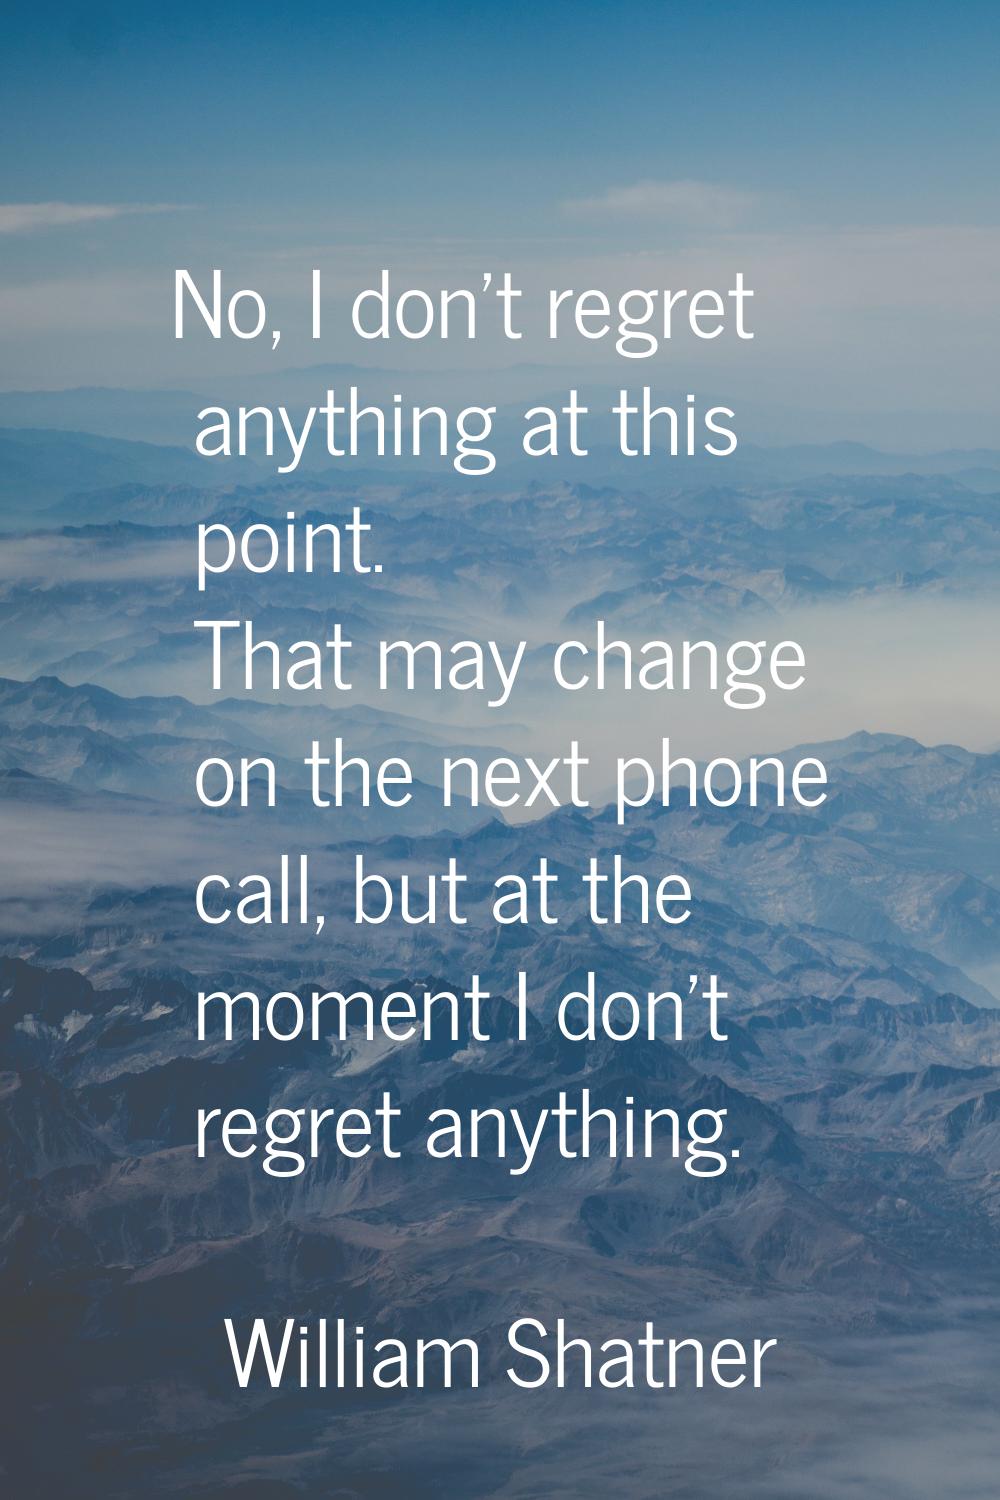 No, I don't regret anything at this point. That may change on the next phone call, but at the momen